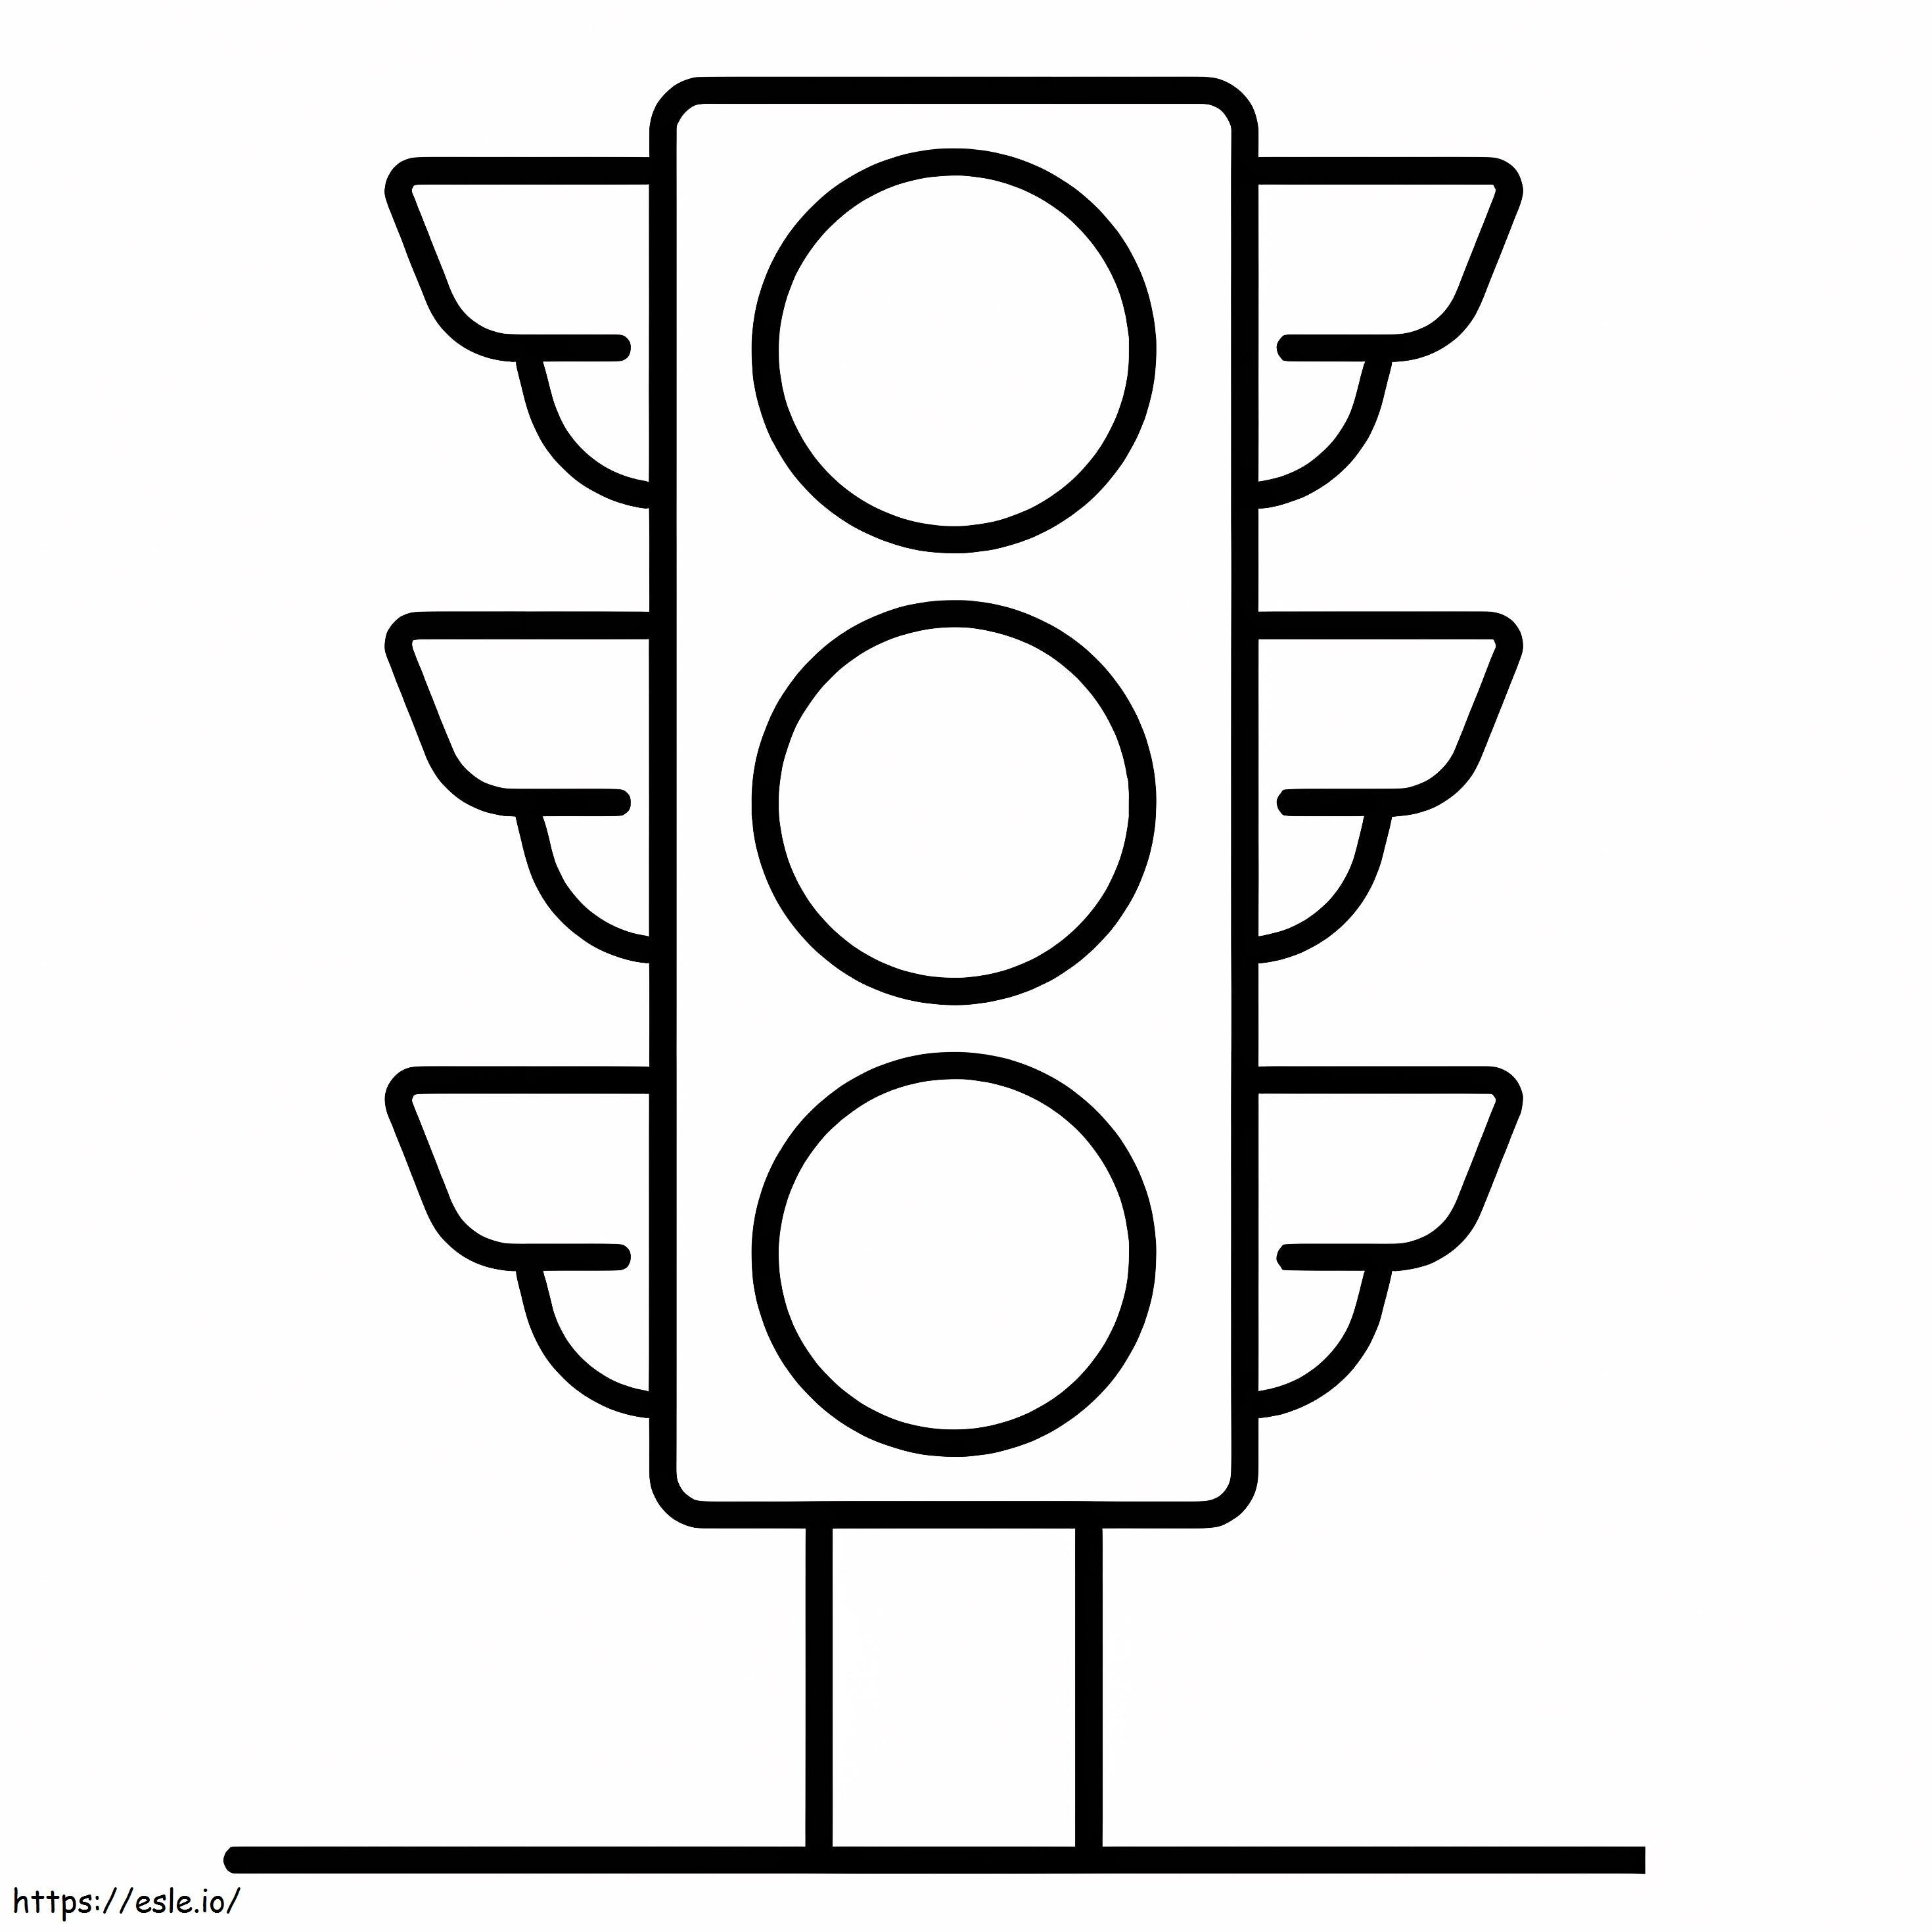 Simple Traffic Light coloring page